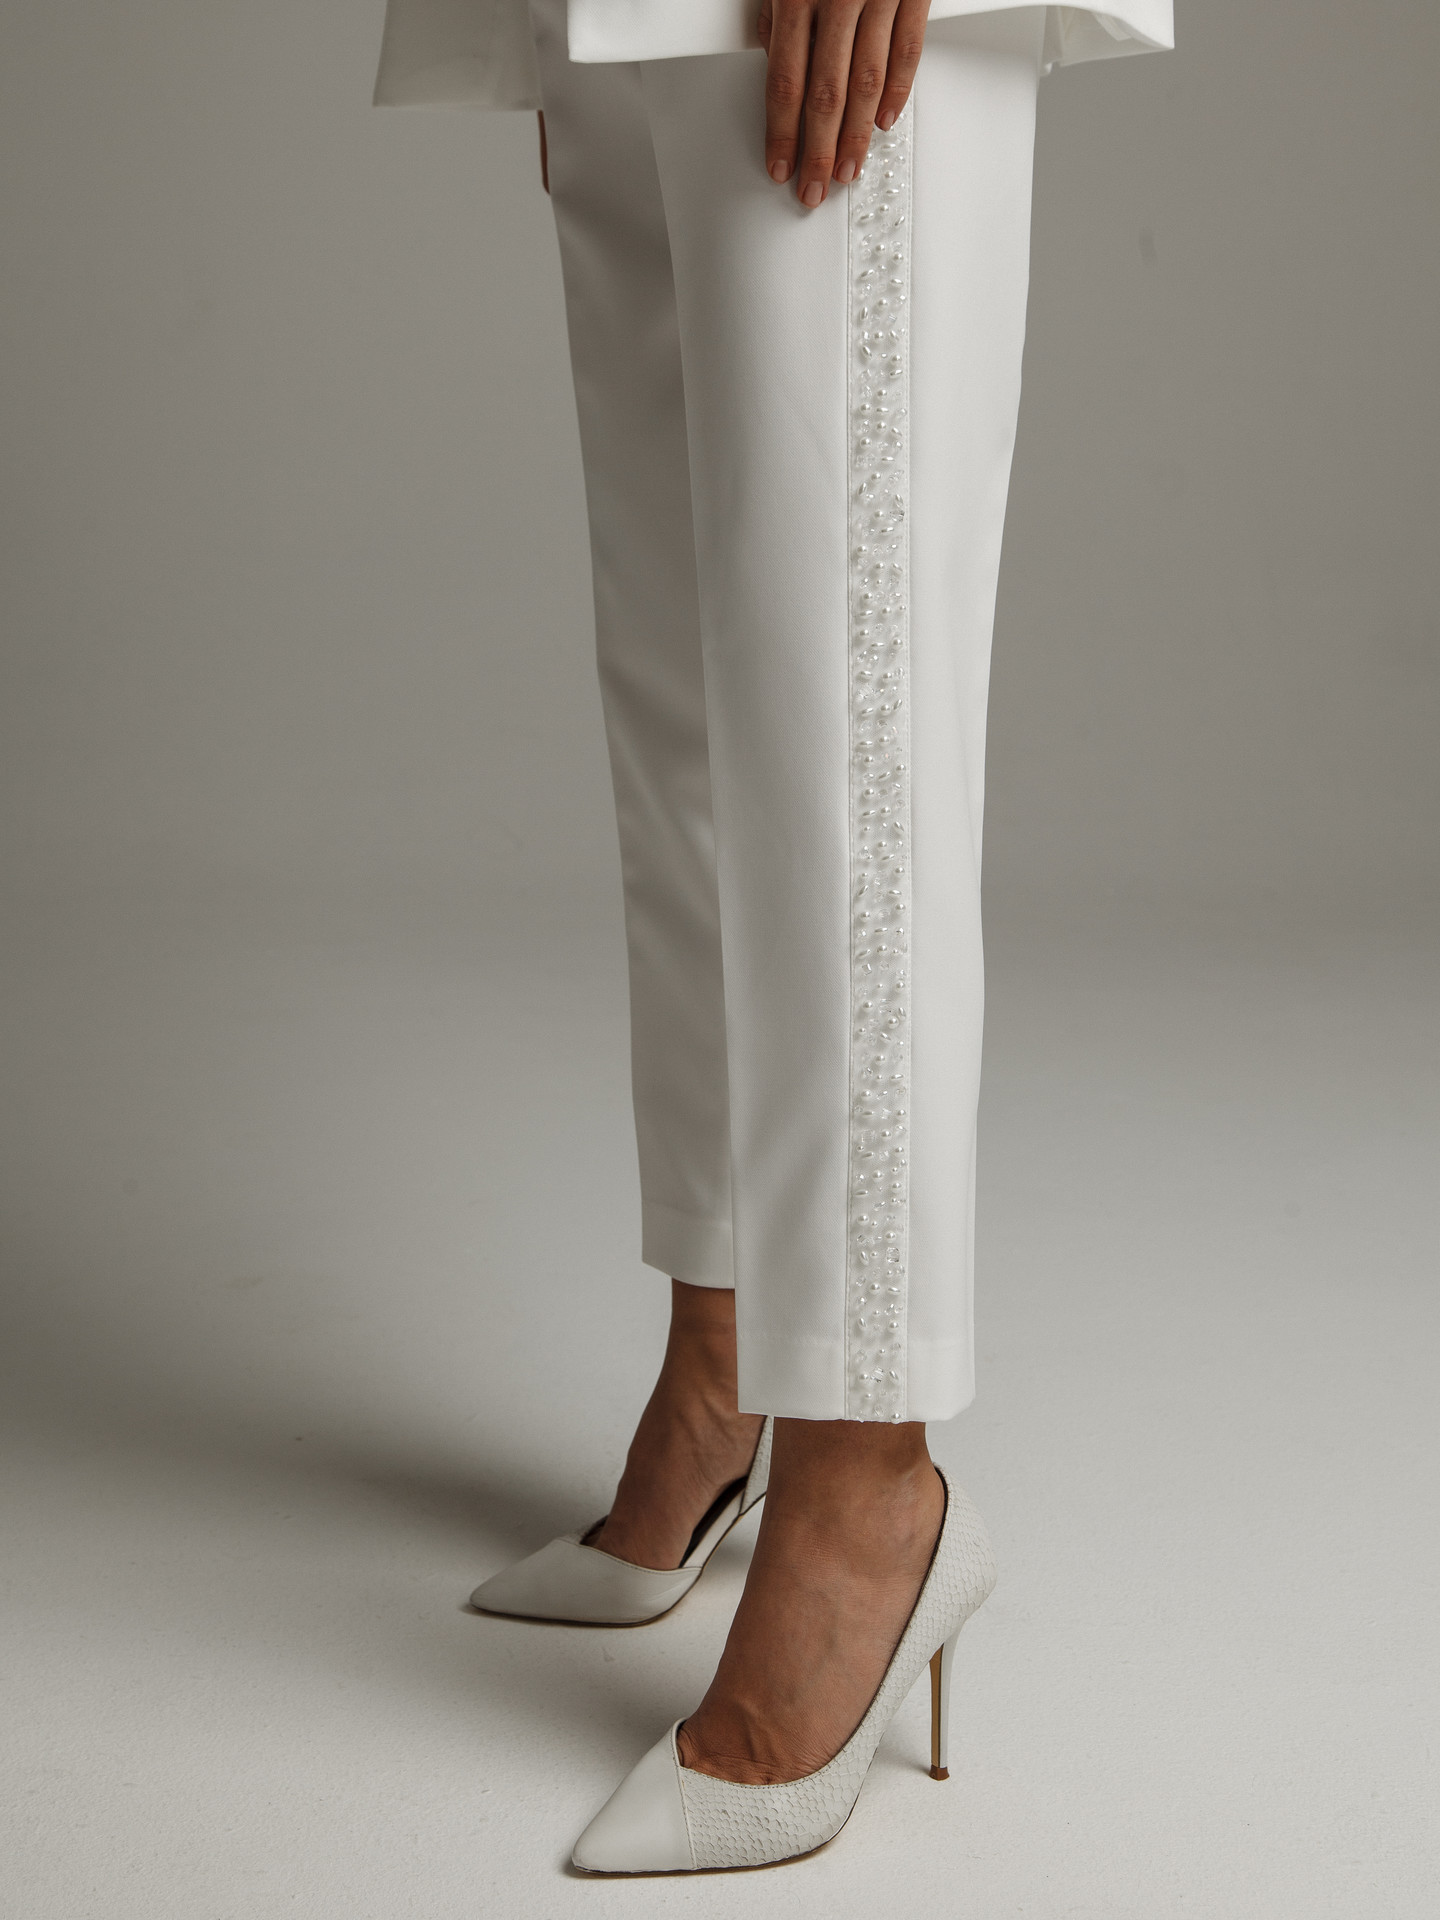 Beaded trousers, 2021, couture, trousers, bridal, off-white, beaded bridal suit, embroidery, popular